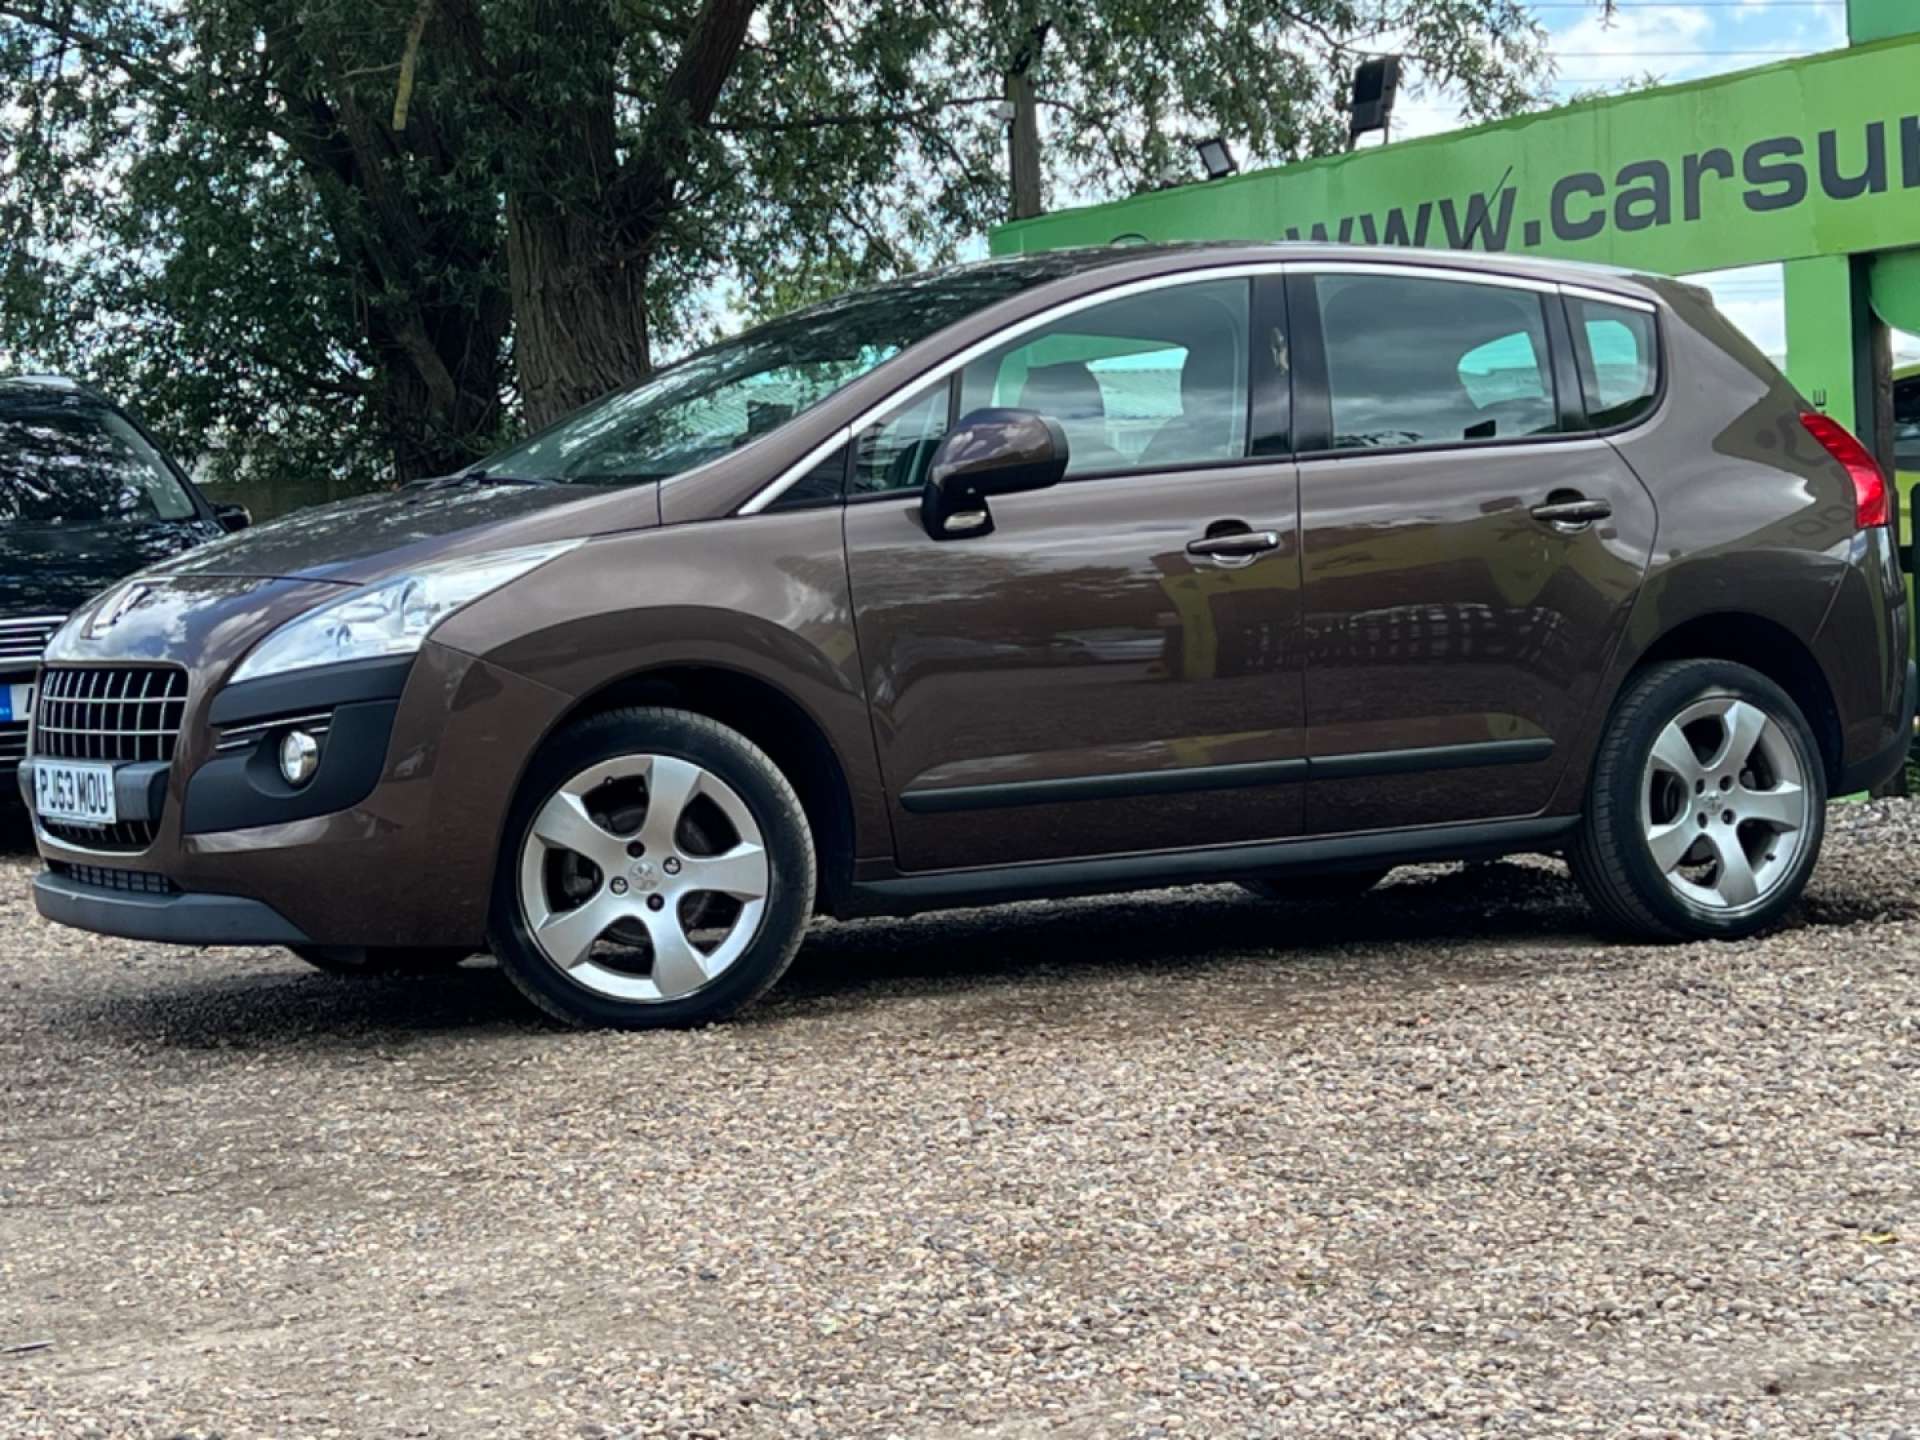 PEUGEOT 3008 1.6 3008 Active HDi 5dr #3